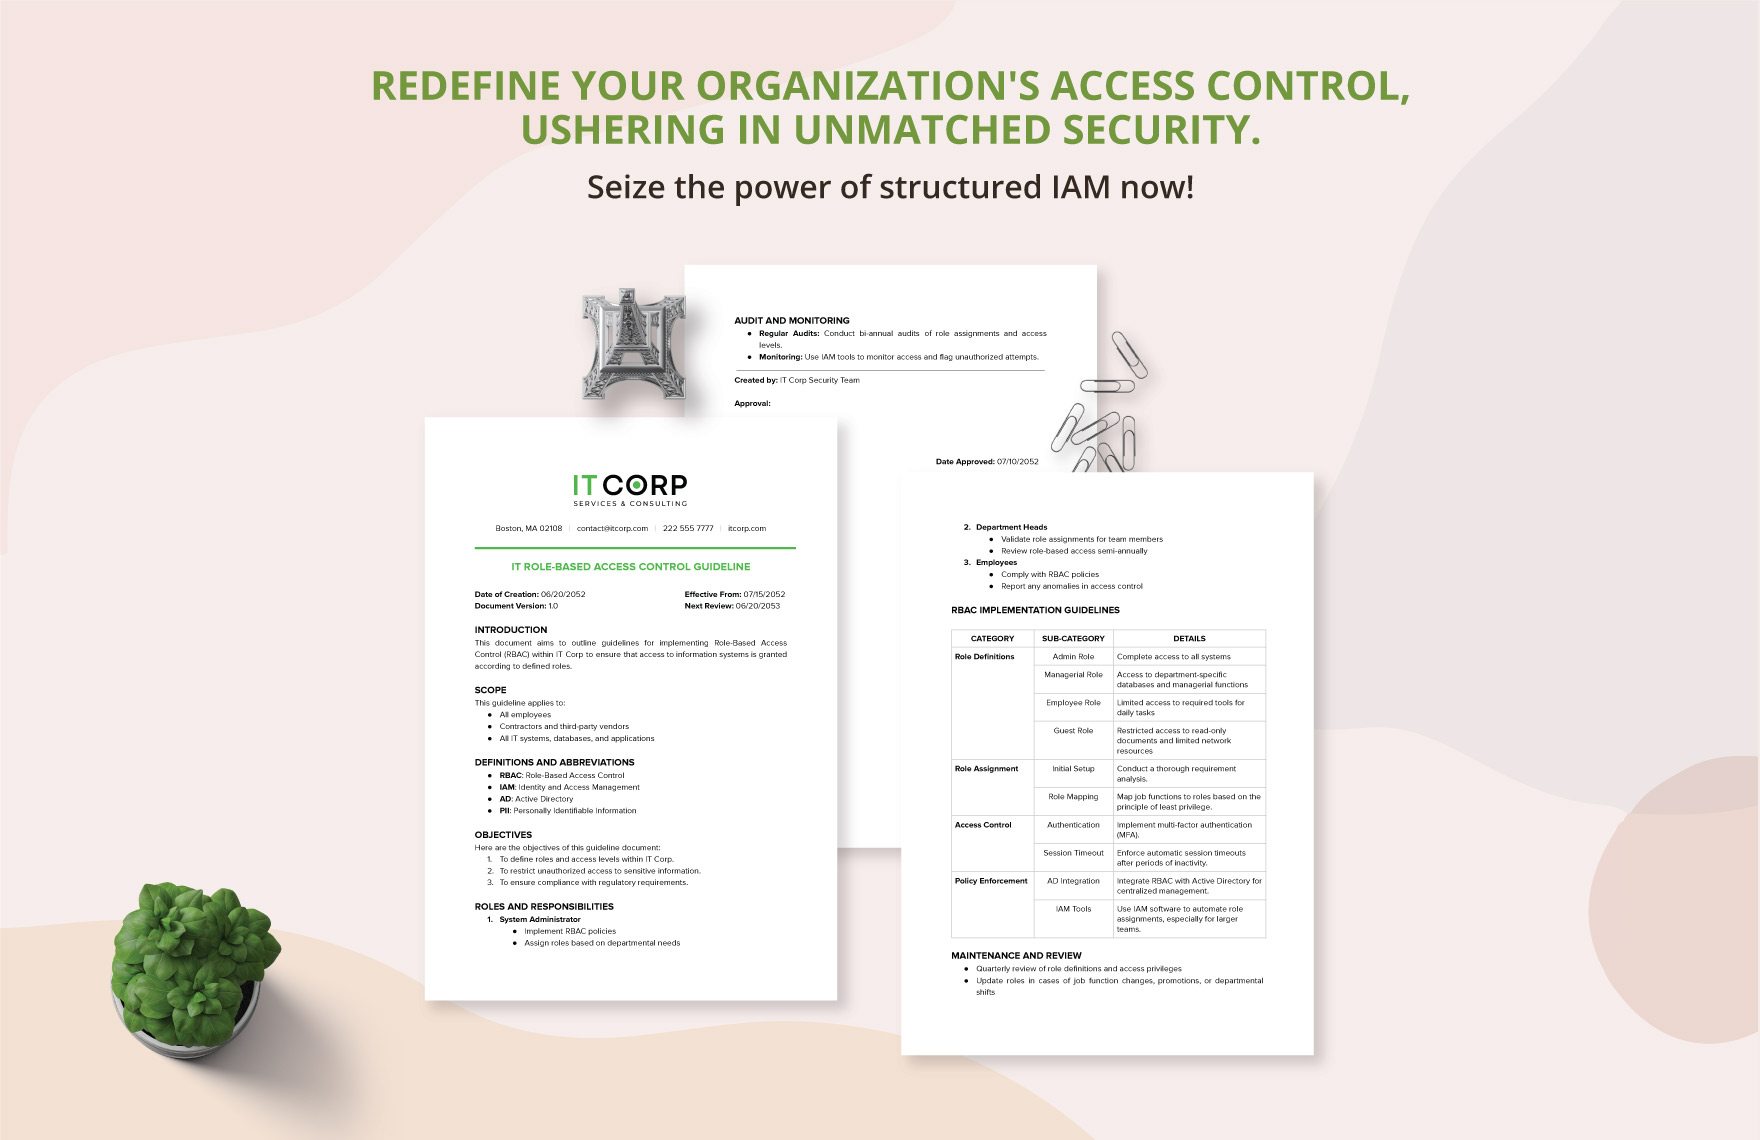 IT Role-Based Access Control Guideline Template